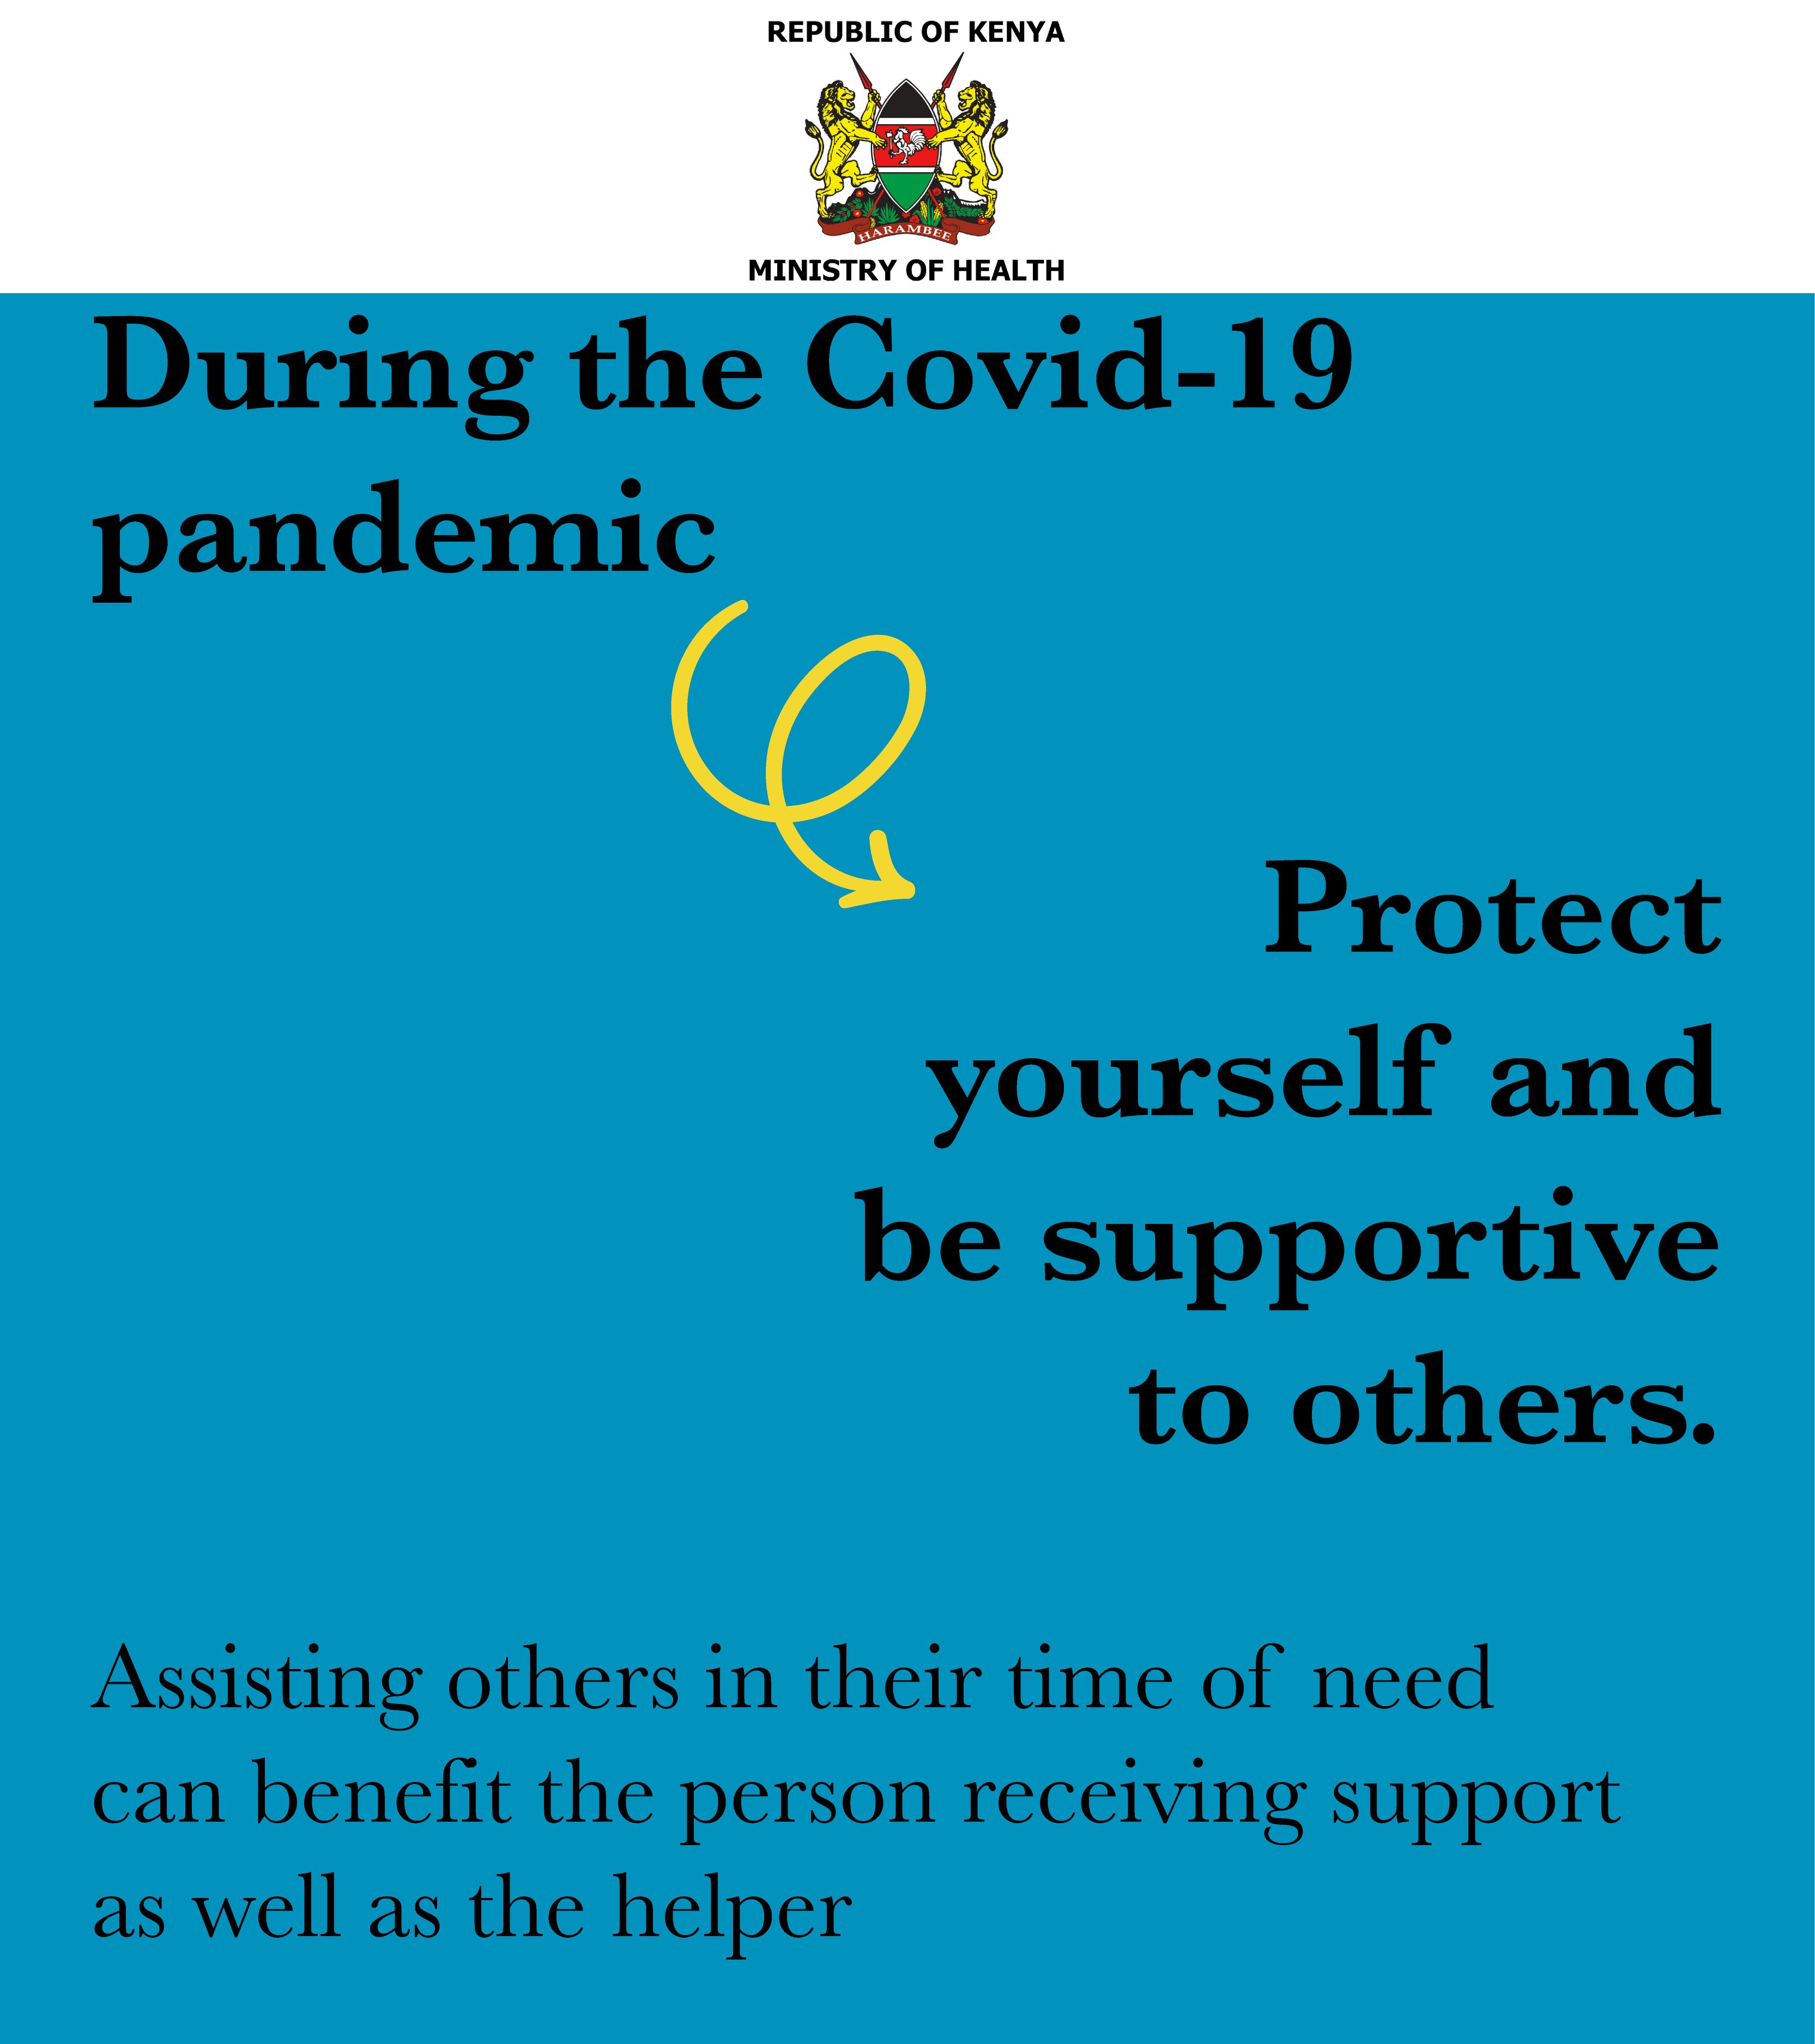 Protect yourself and be supportive to others